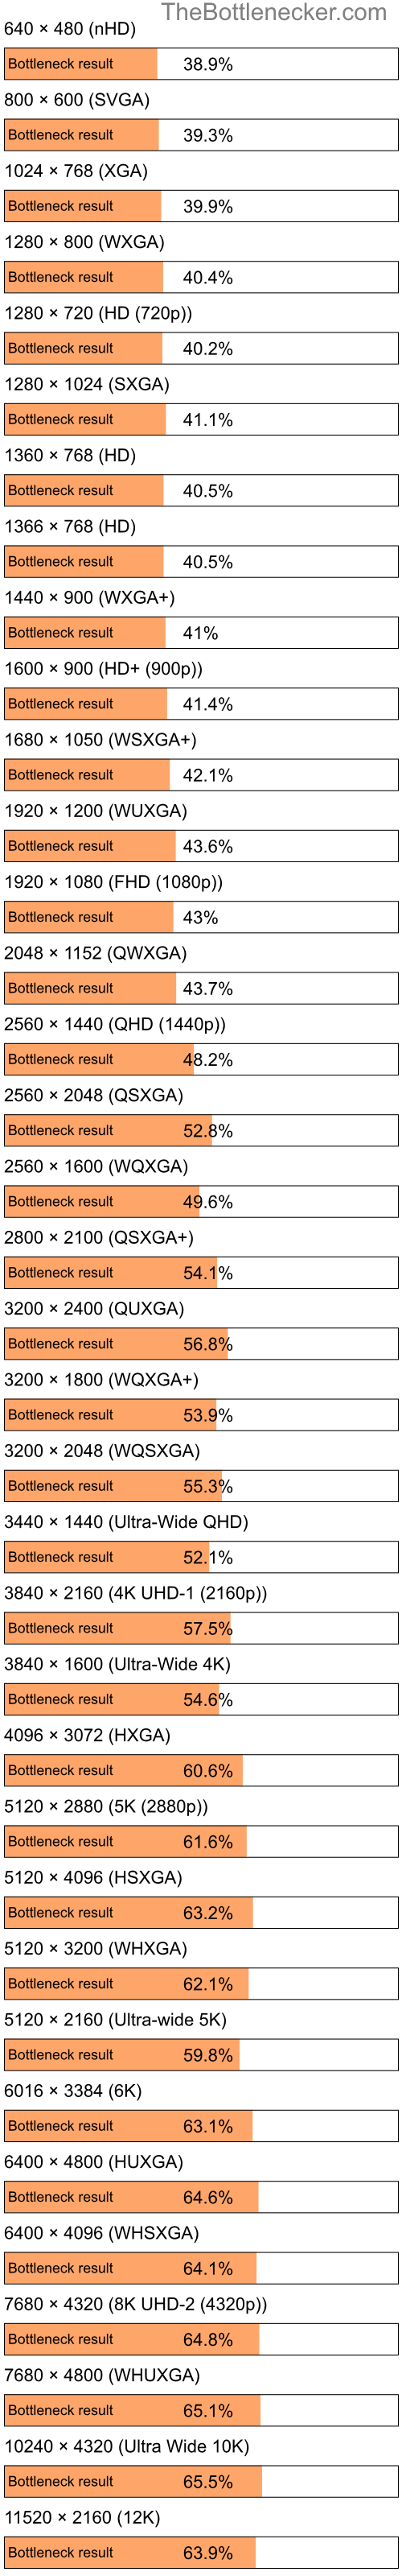 Bottleneck results by resolution for AMD Ryzen Threadripper PRO 3975WX and NVIDIA GeForce GTX 1050 Ti in General Tasks